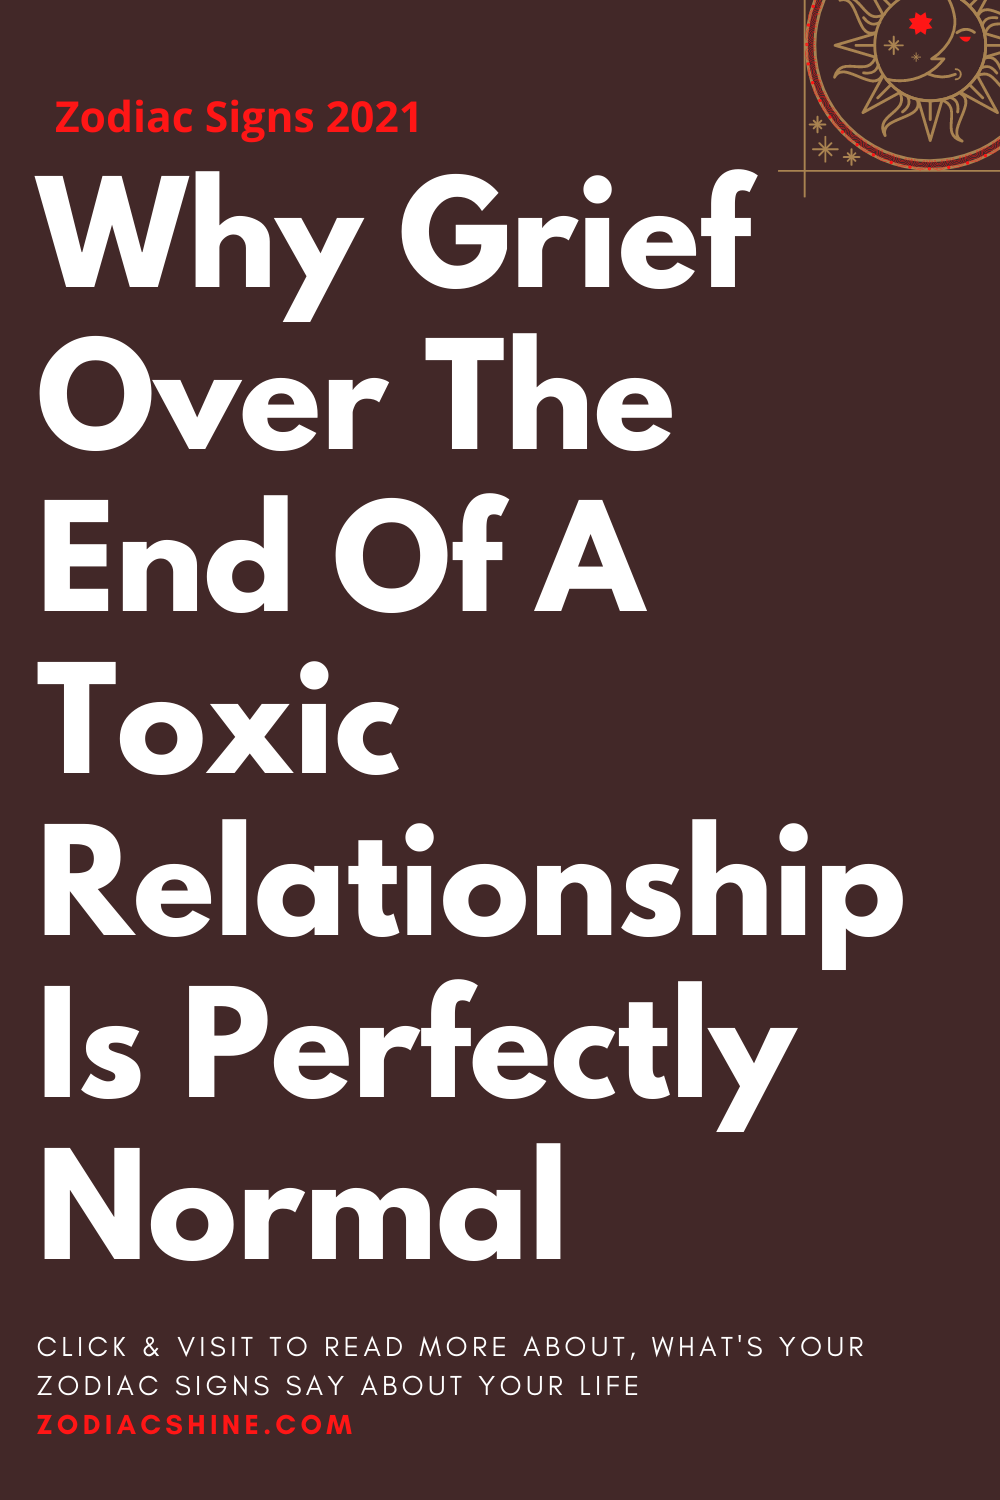 Why Grief Over The End Of A Toxic Relationship Is Perfectly Normal